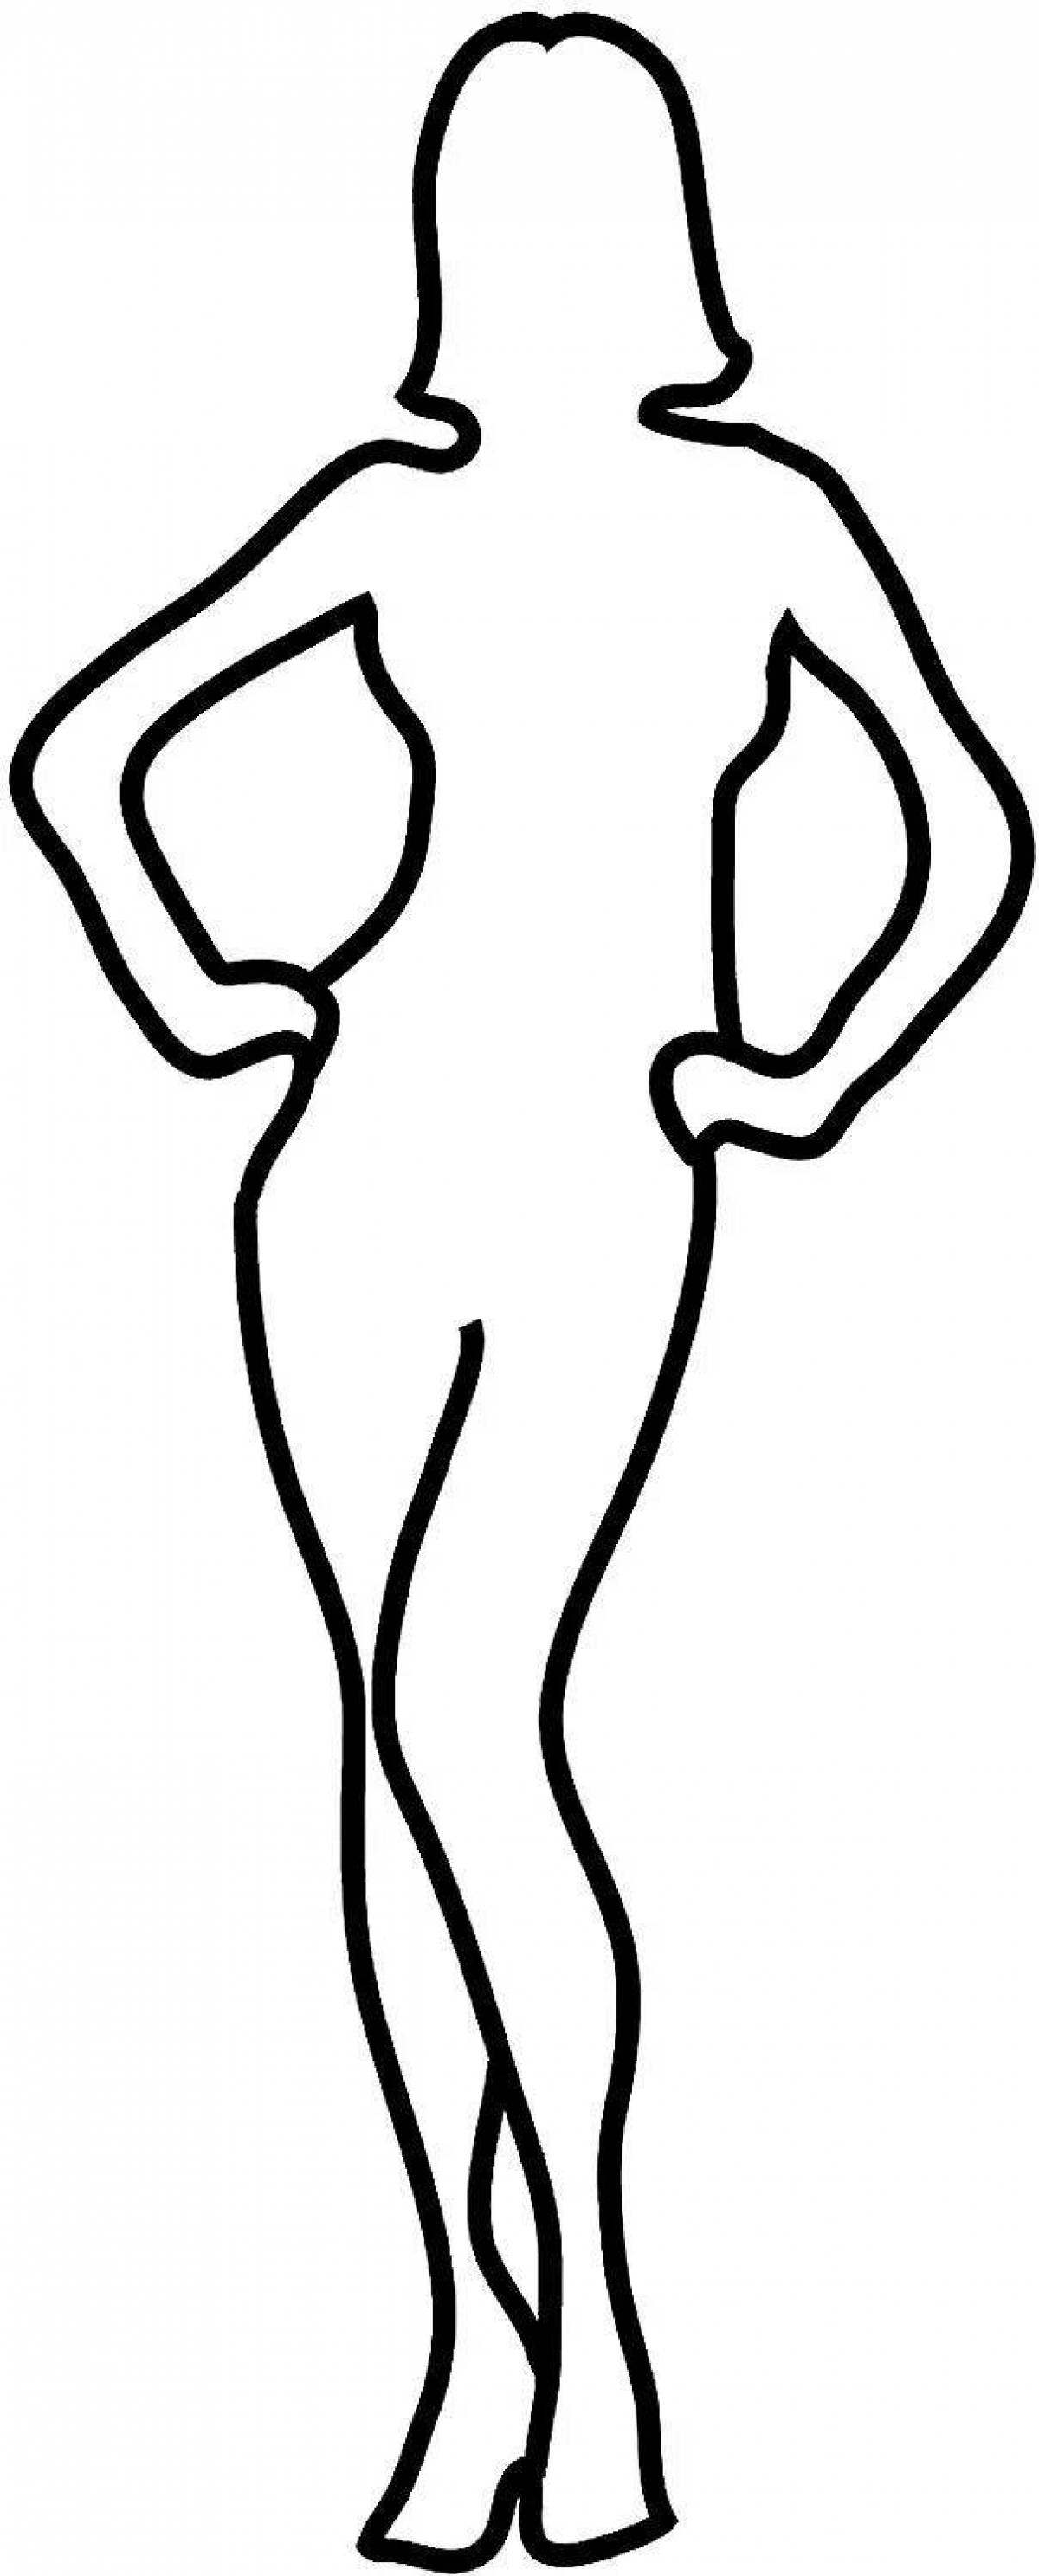 Coloring page energetic human figure